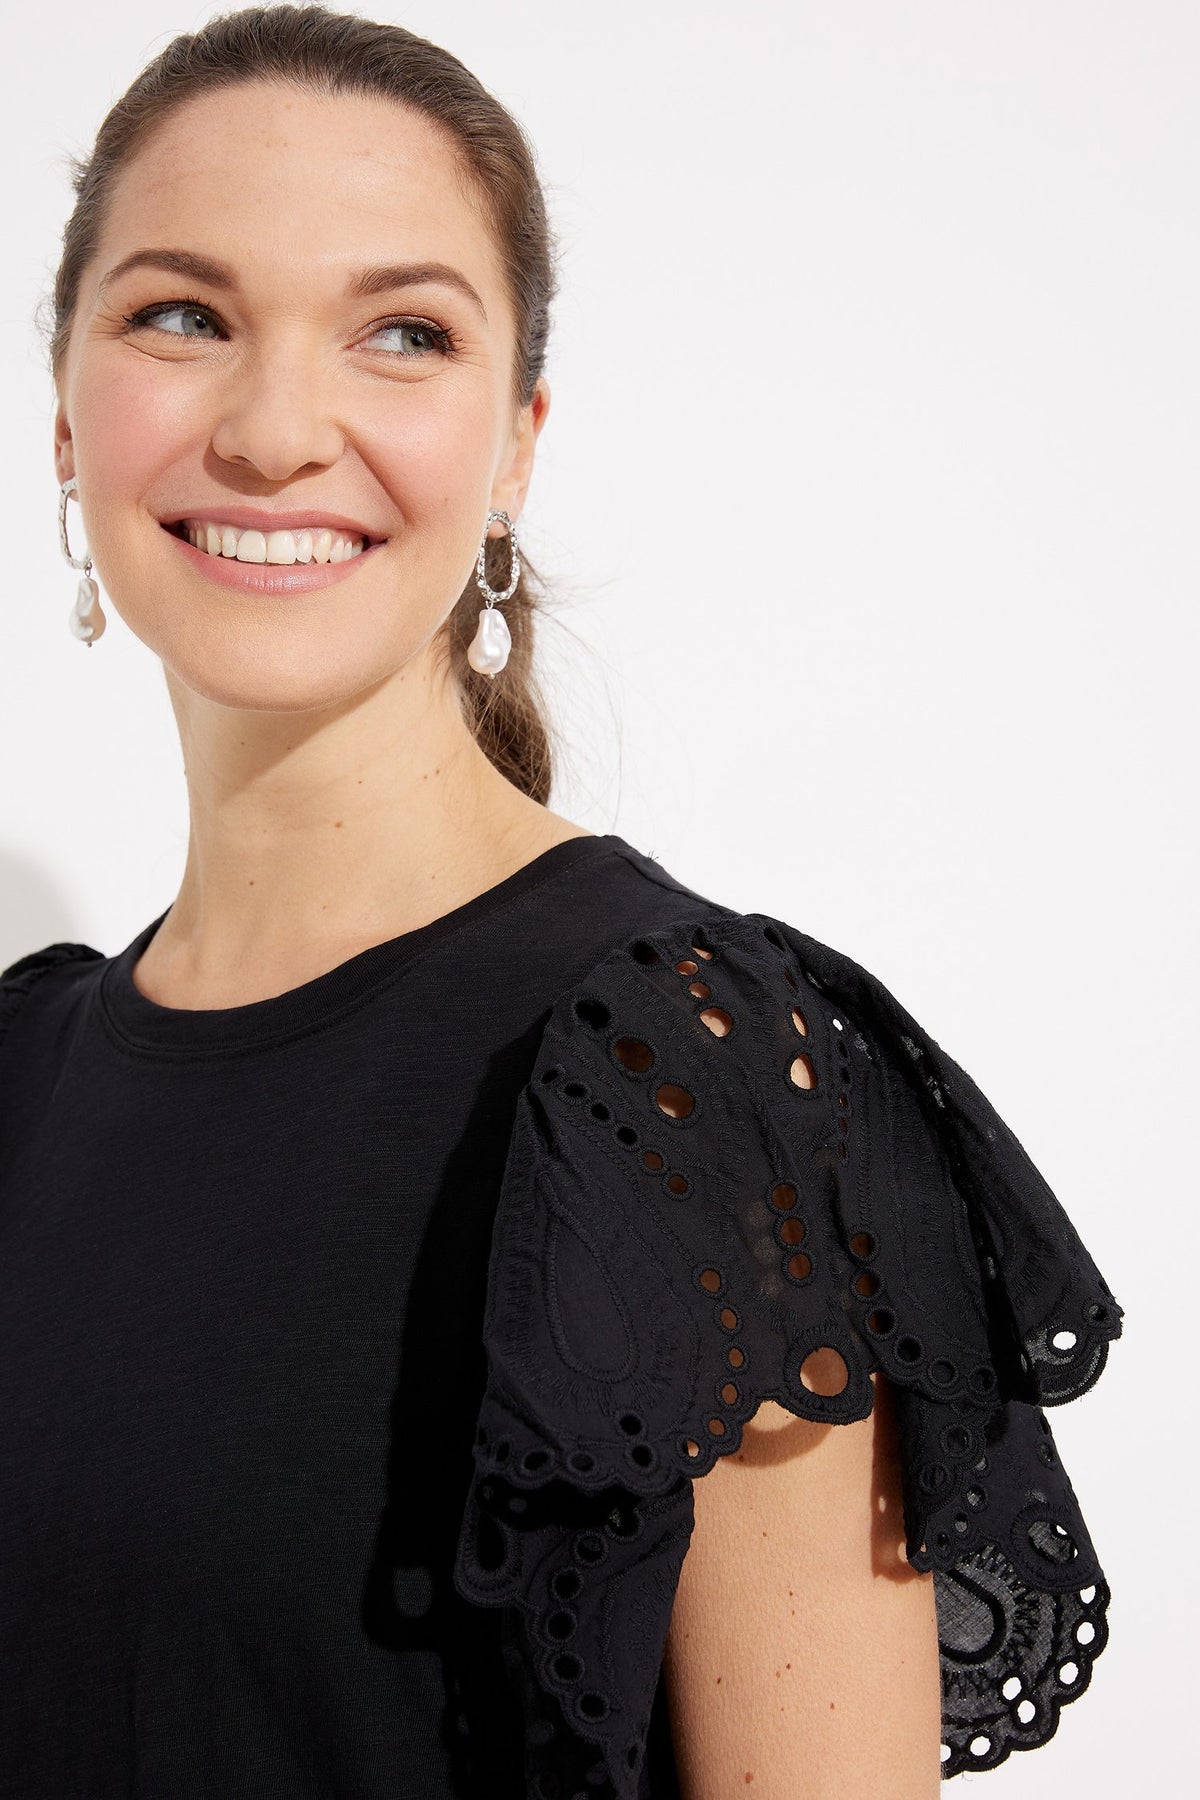 Melissa Nepton Eyelet Sleeve Top in Black - Size S Available